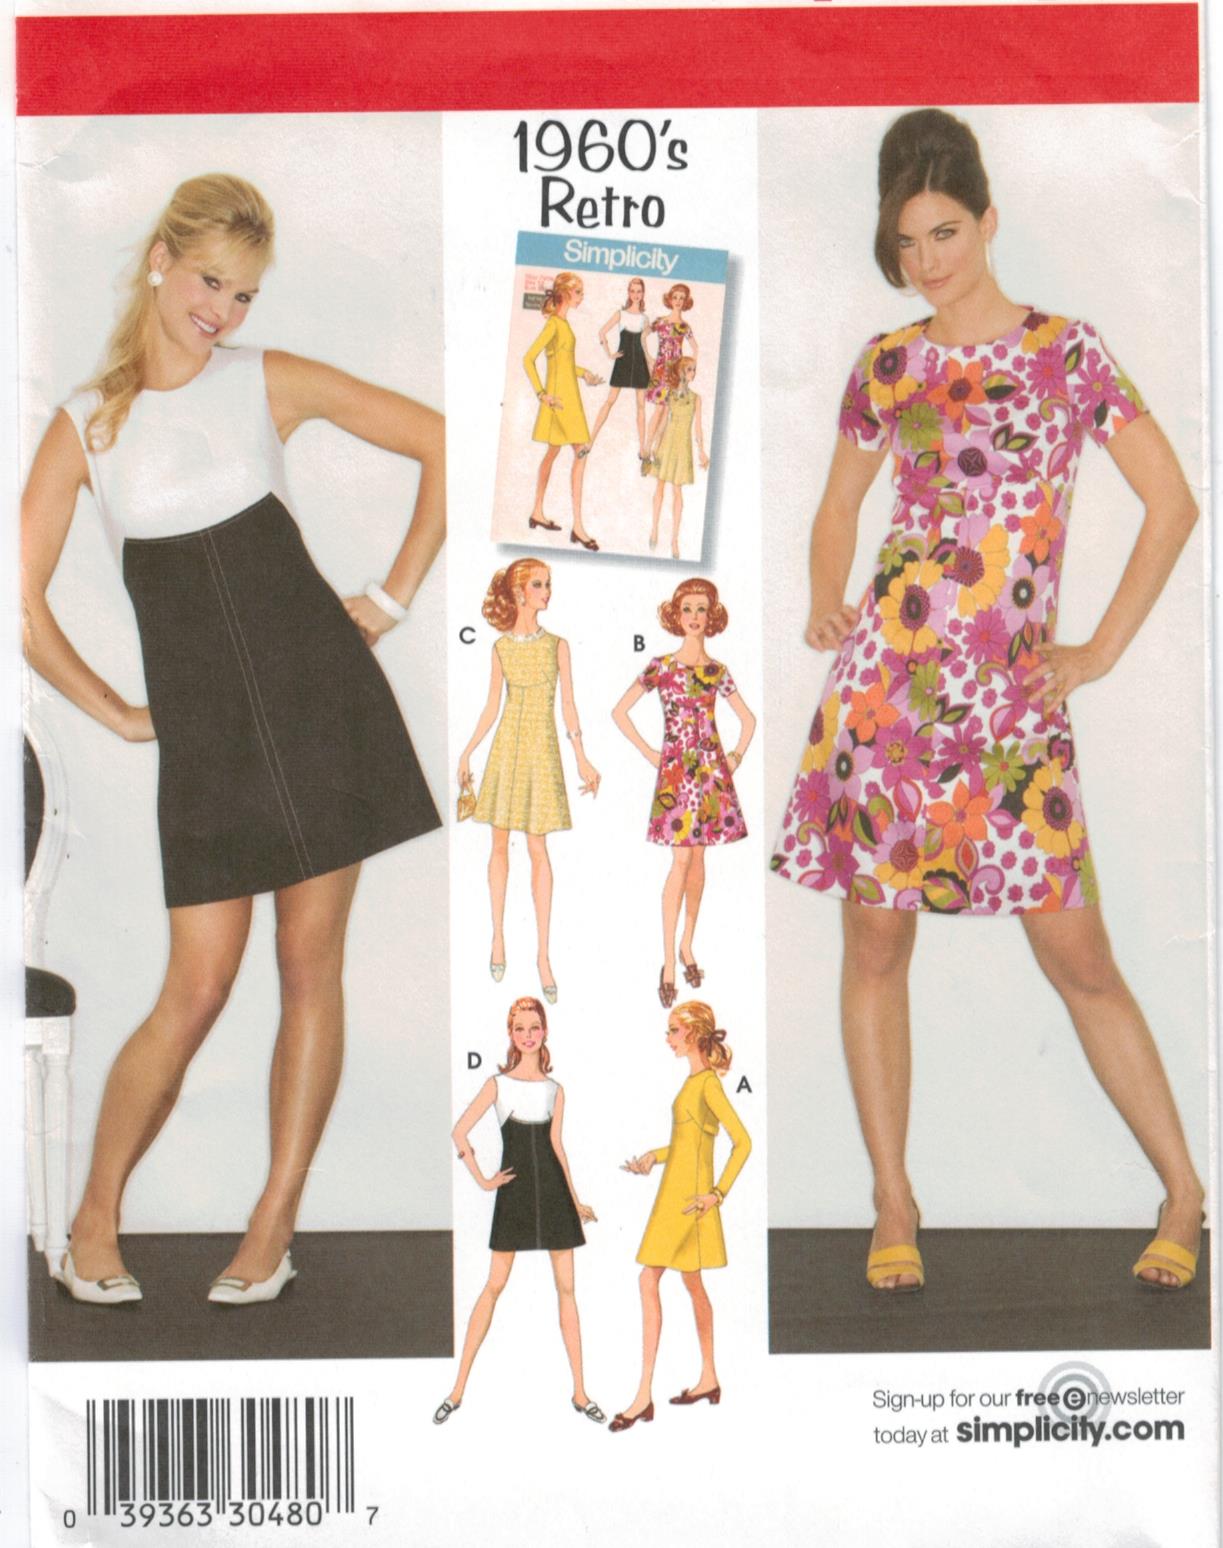 Simplicity Pattern 3833 1960's Retro Classic A line dresses four views  sleeveless, short sleeve or long sleeve